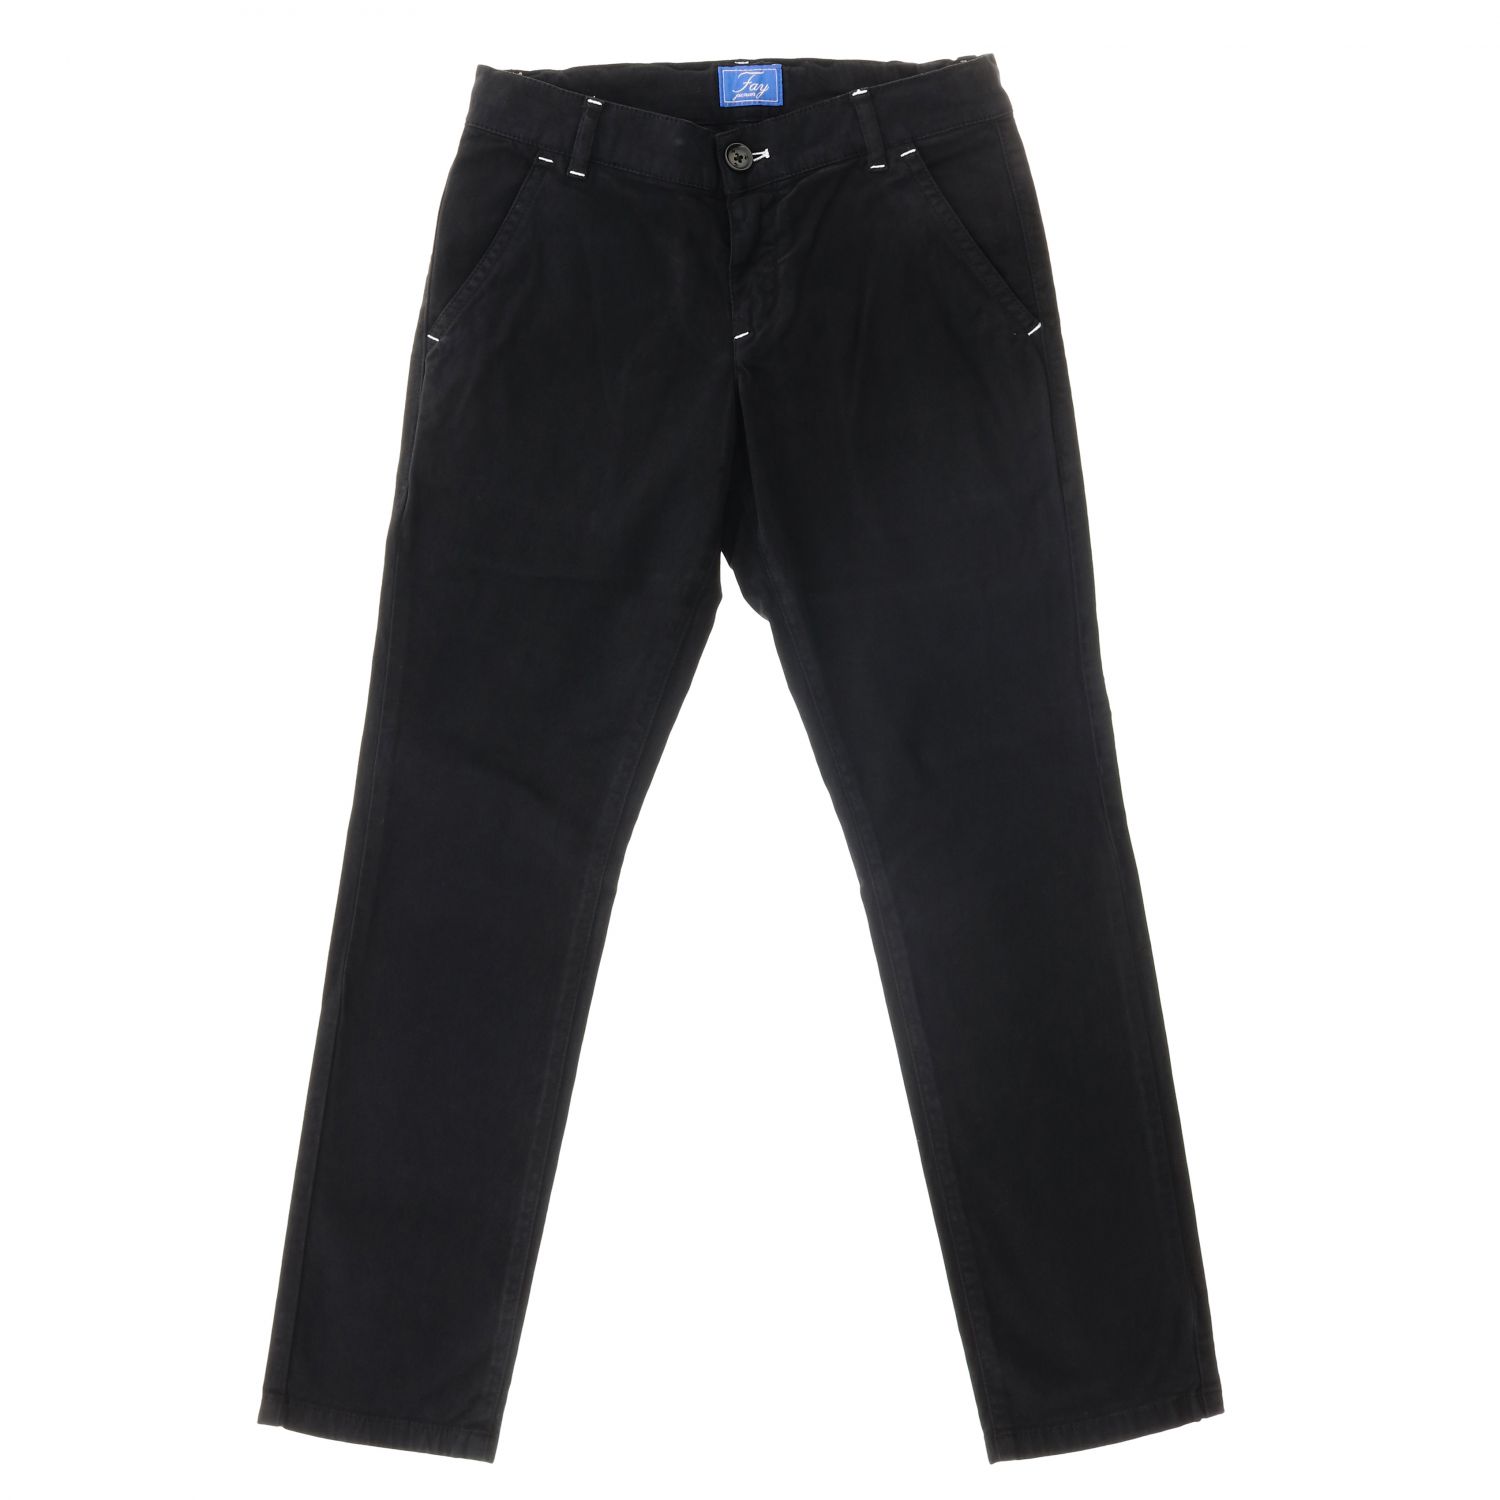 Fay Outlet: trousers for boy - Black | Fay trousers NUH8039730T RFZ ...